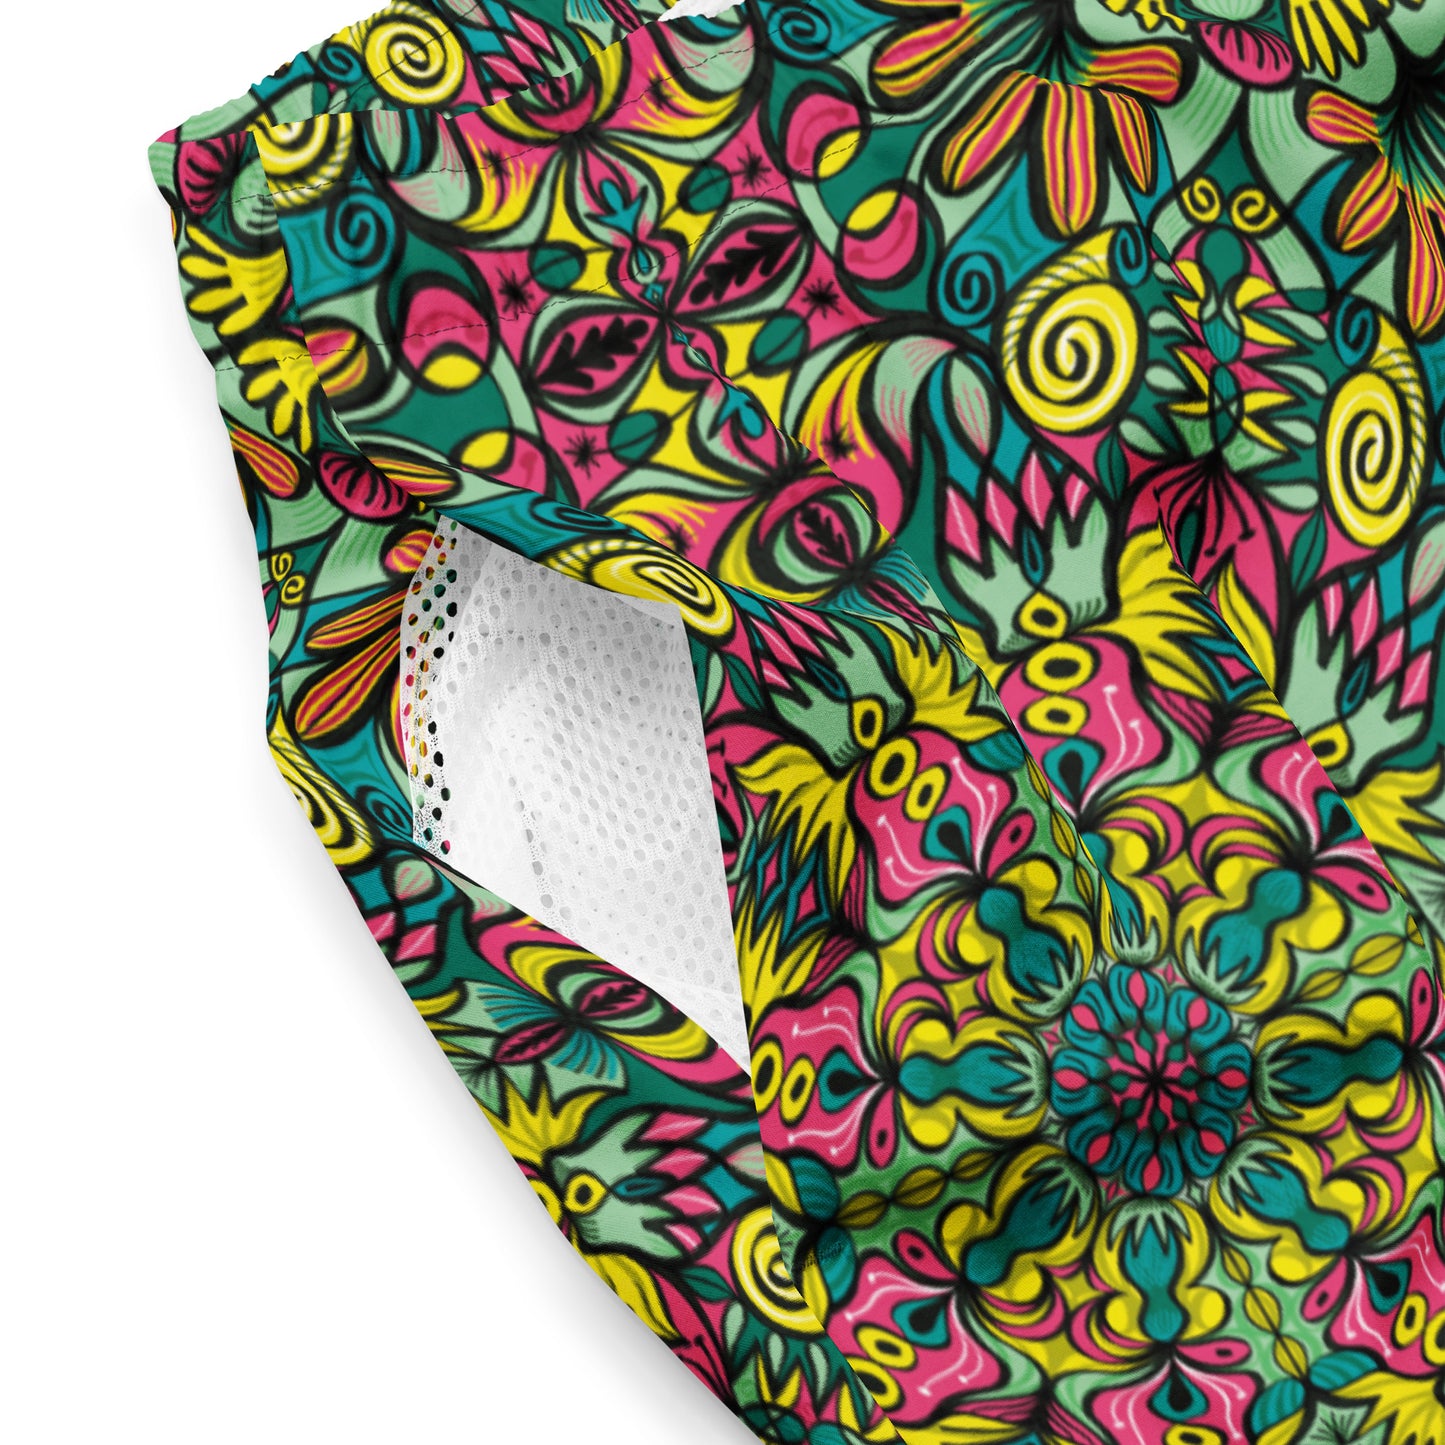 Exploring Jungle Oddities: Inspiration from the Fascinating Wildflowers of the Tropics. Men's swim trunks. Product details